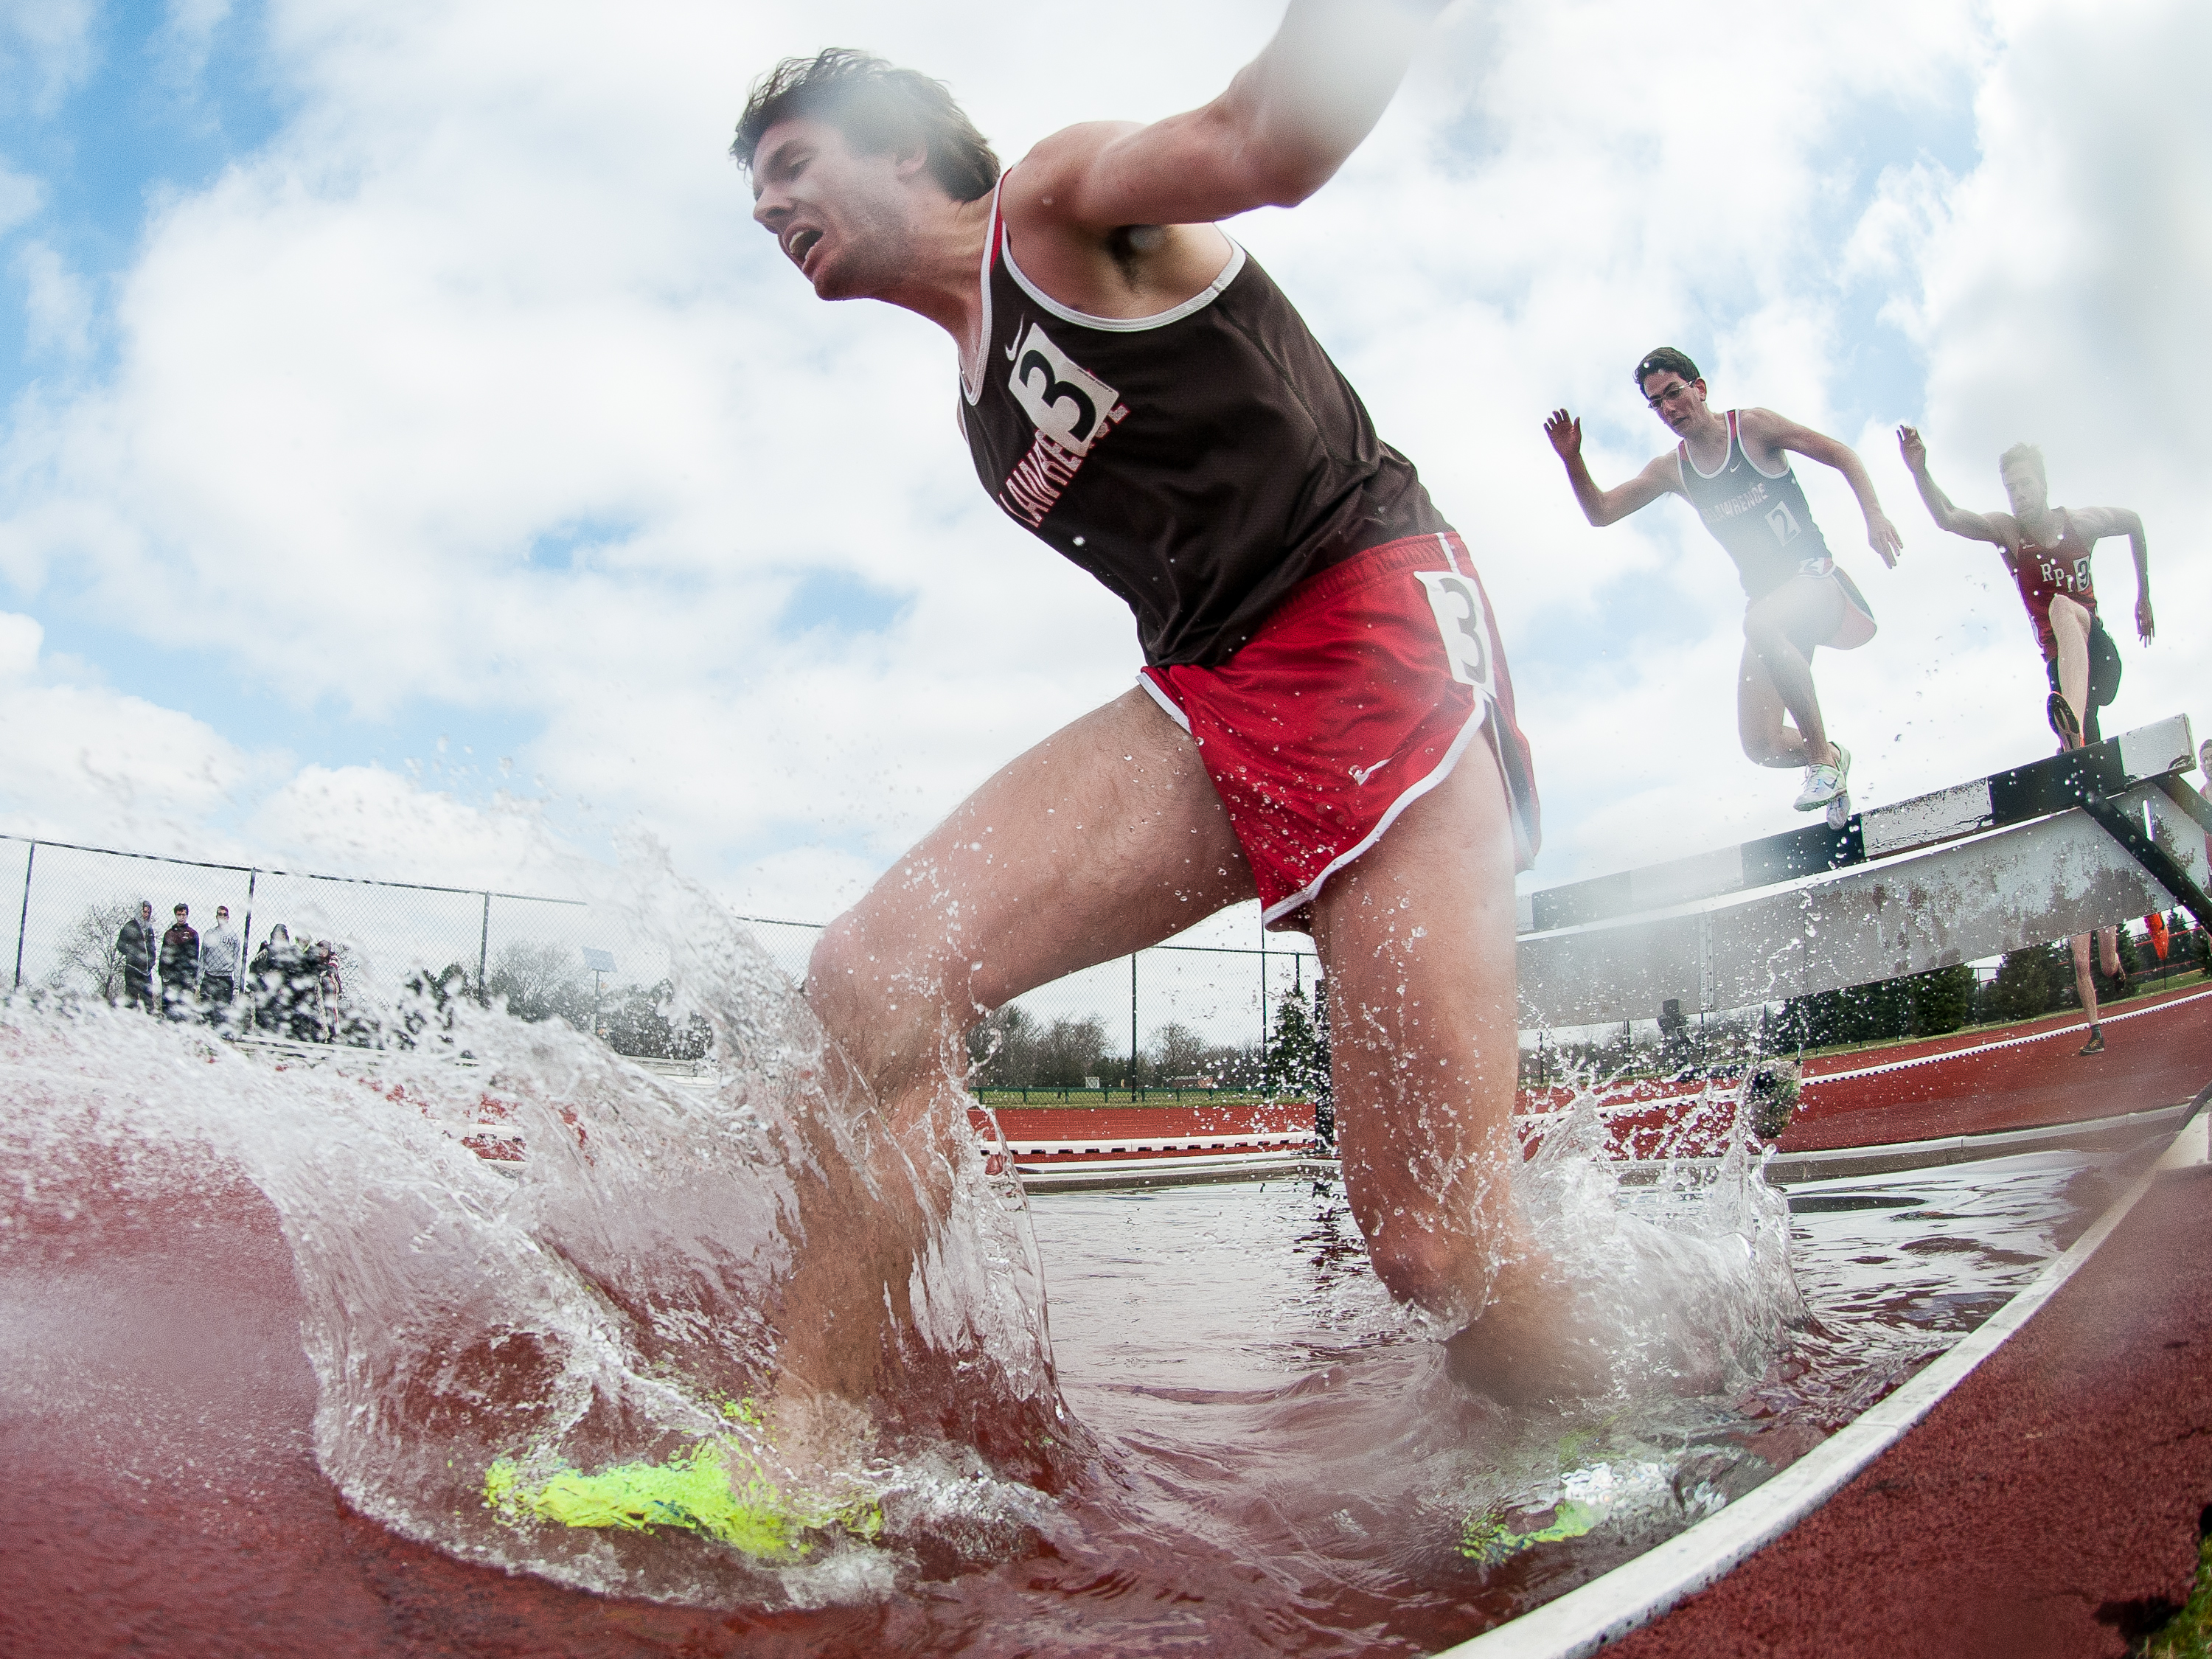 Aaron Tompkins of the Saint Lawrence Saints competes in the men's 3,000-meter steeplechase during the 2014 Liberty League Track and Field Championship at Tiger Stadium on Saturday, April 19, 2014 in Henrietta, N.Y. (Josh Barber/RIT SportsZone)